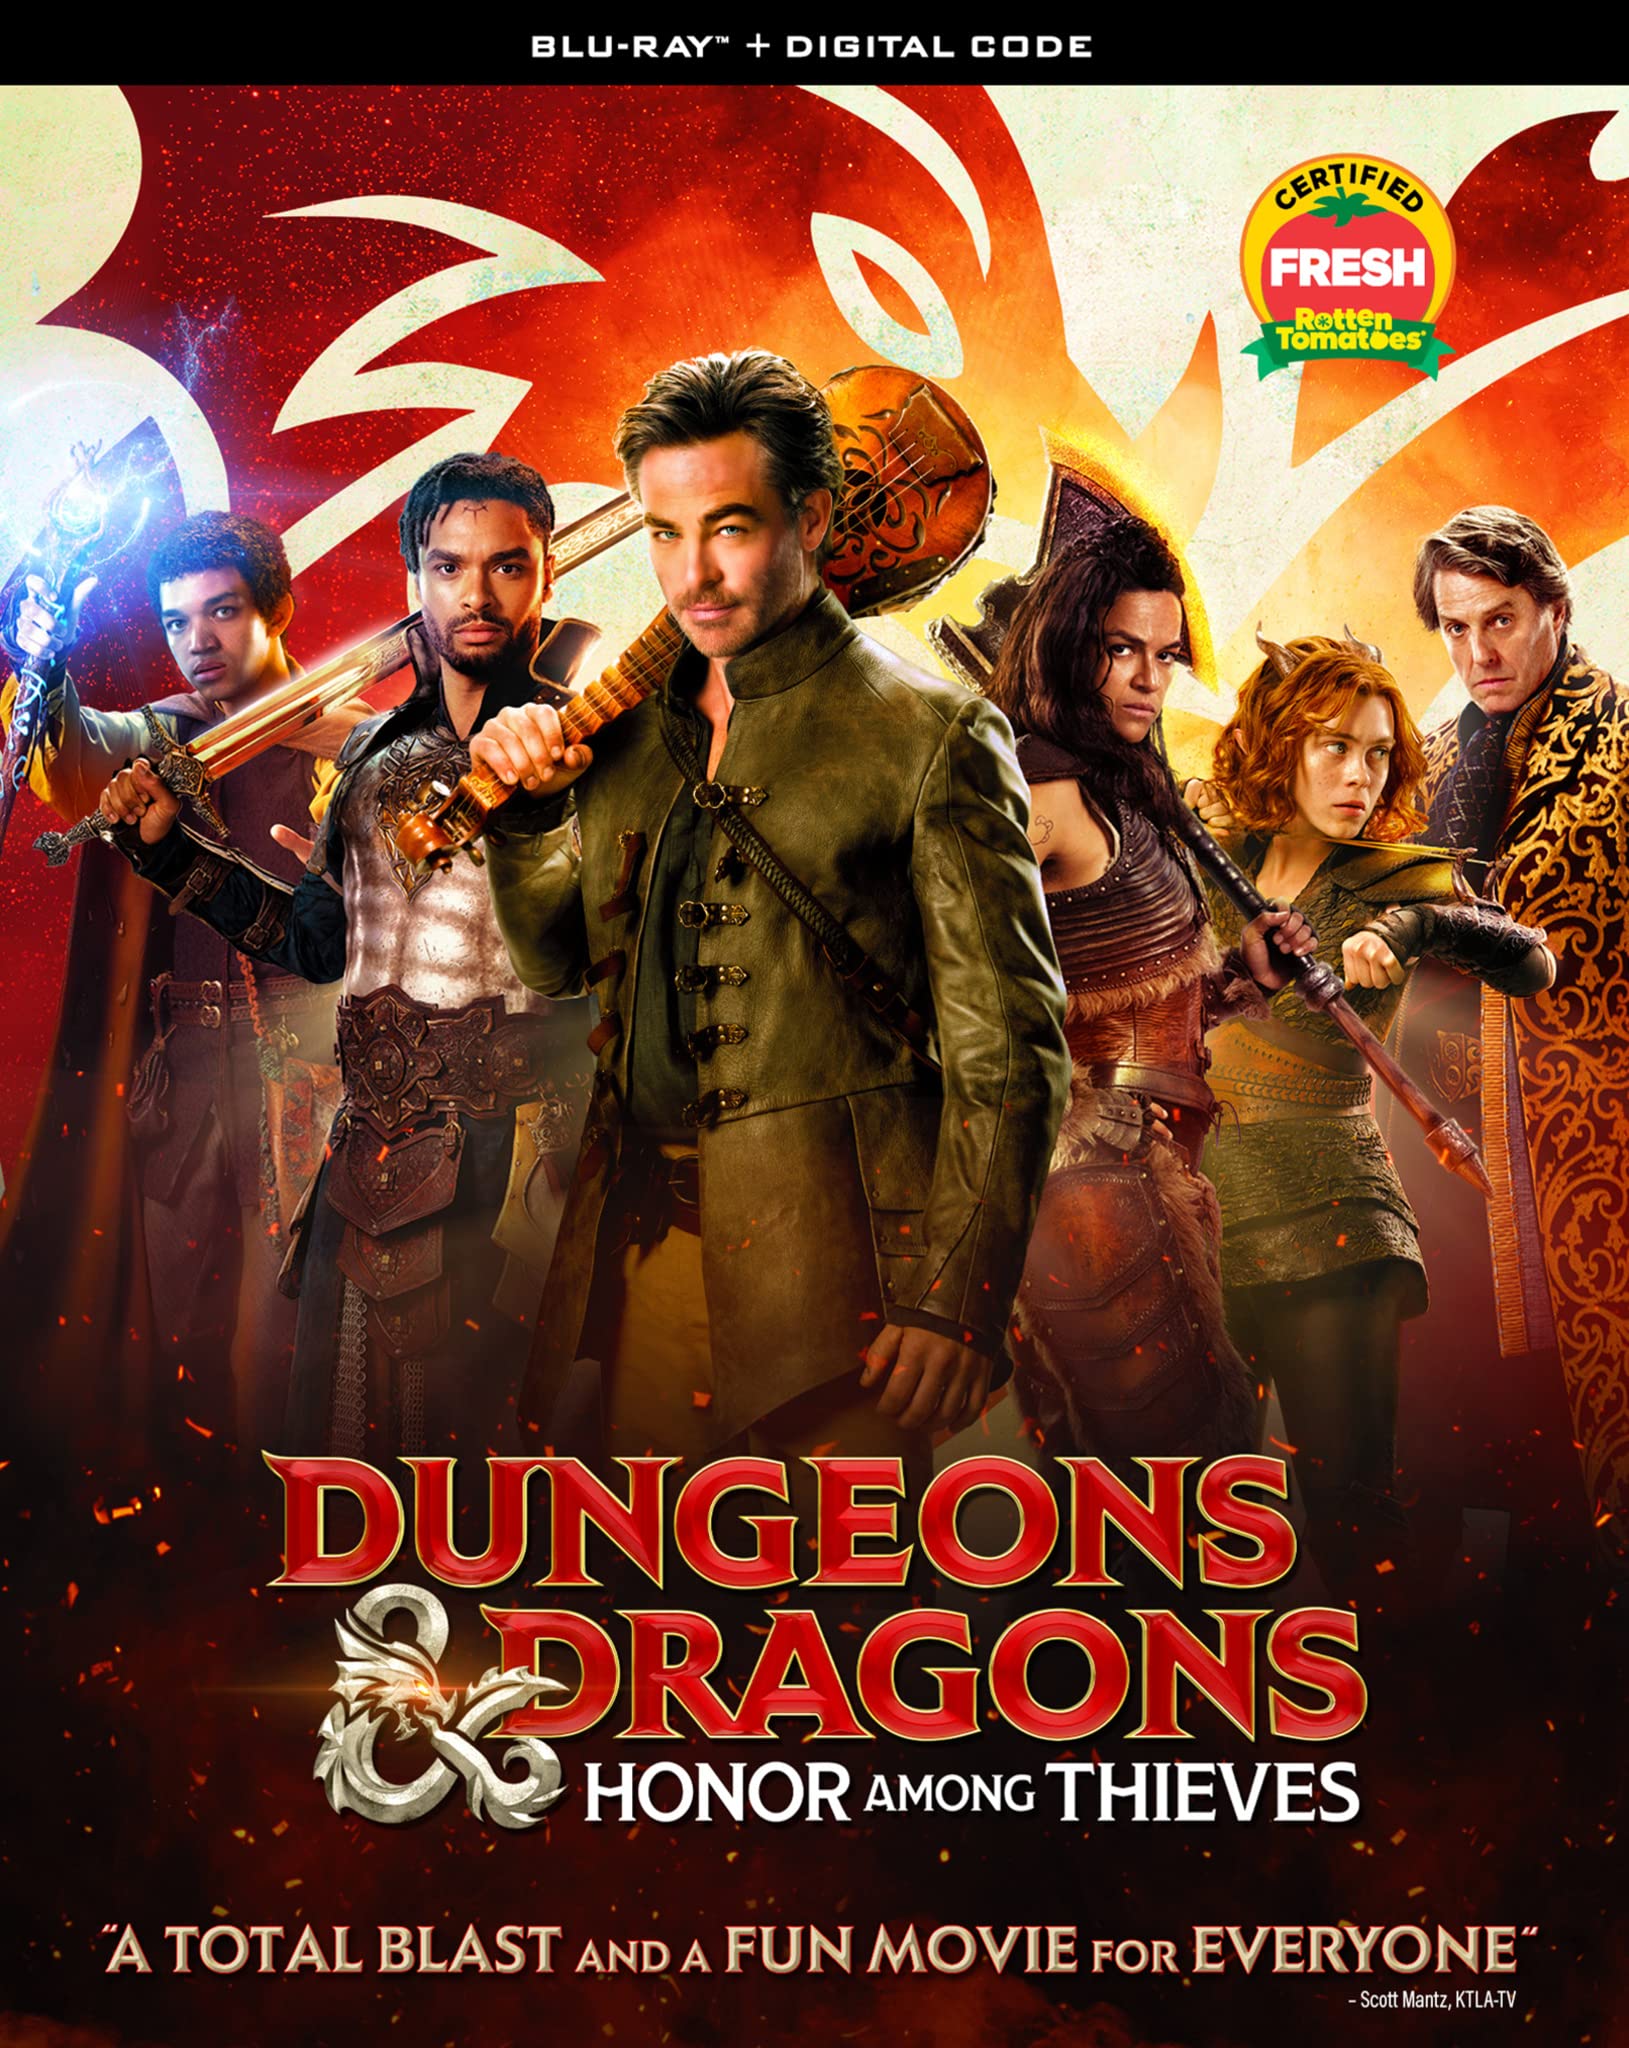 Dungeons & Dragons movie finally confirms UK digital release